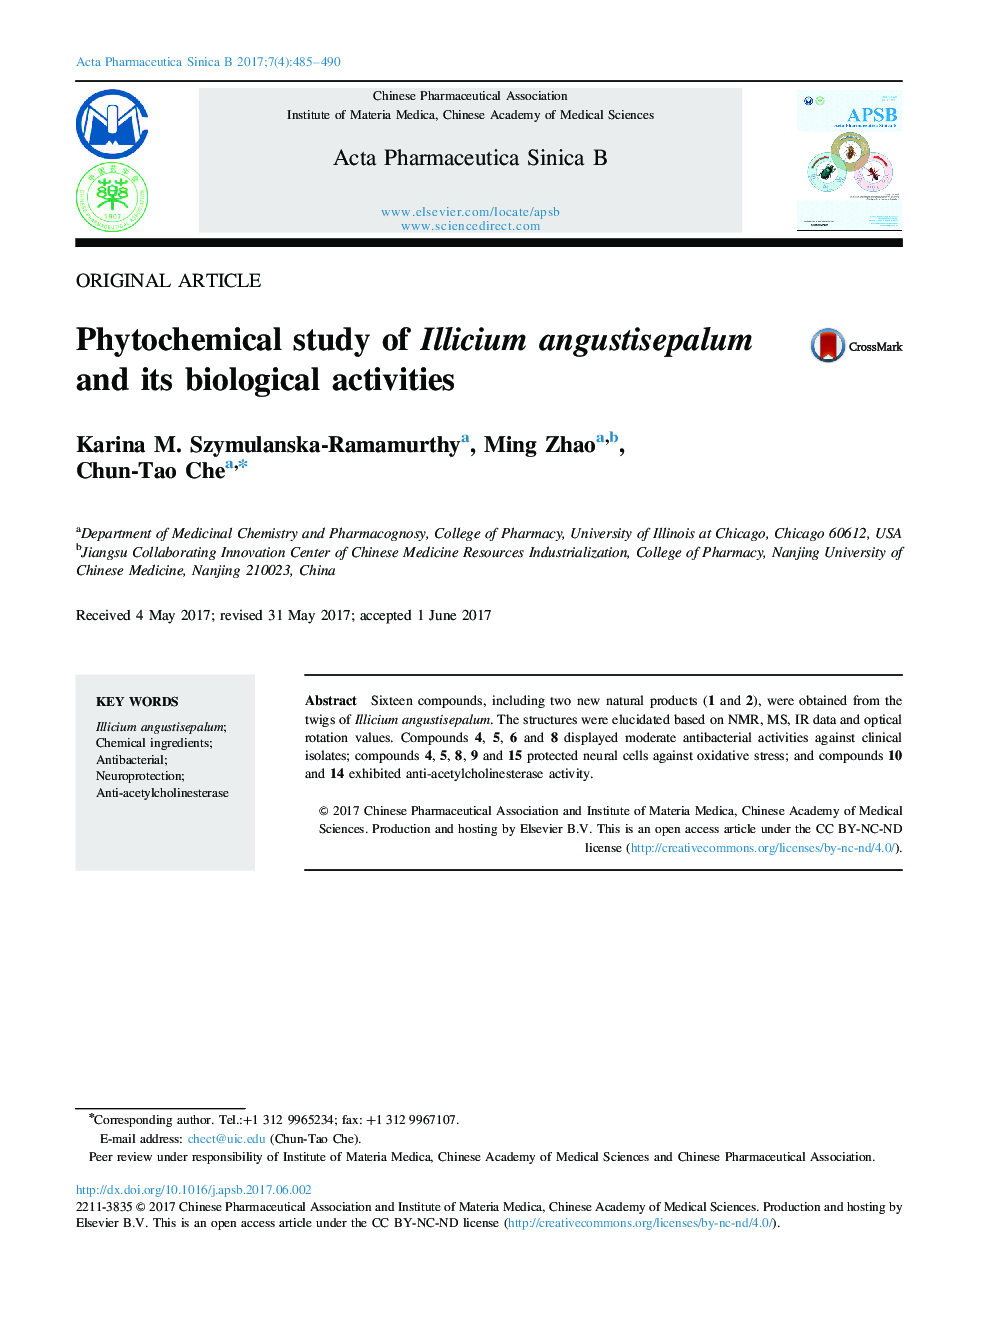 Phytochemical study of Illicium angustisepalum and its biological activities